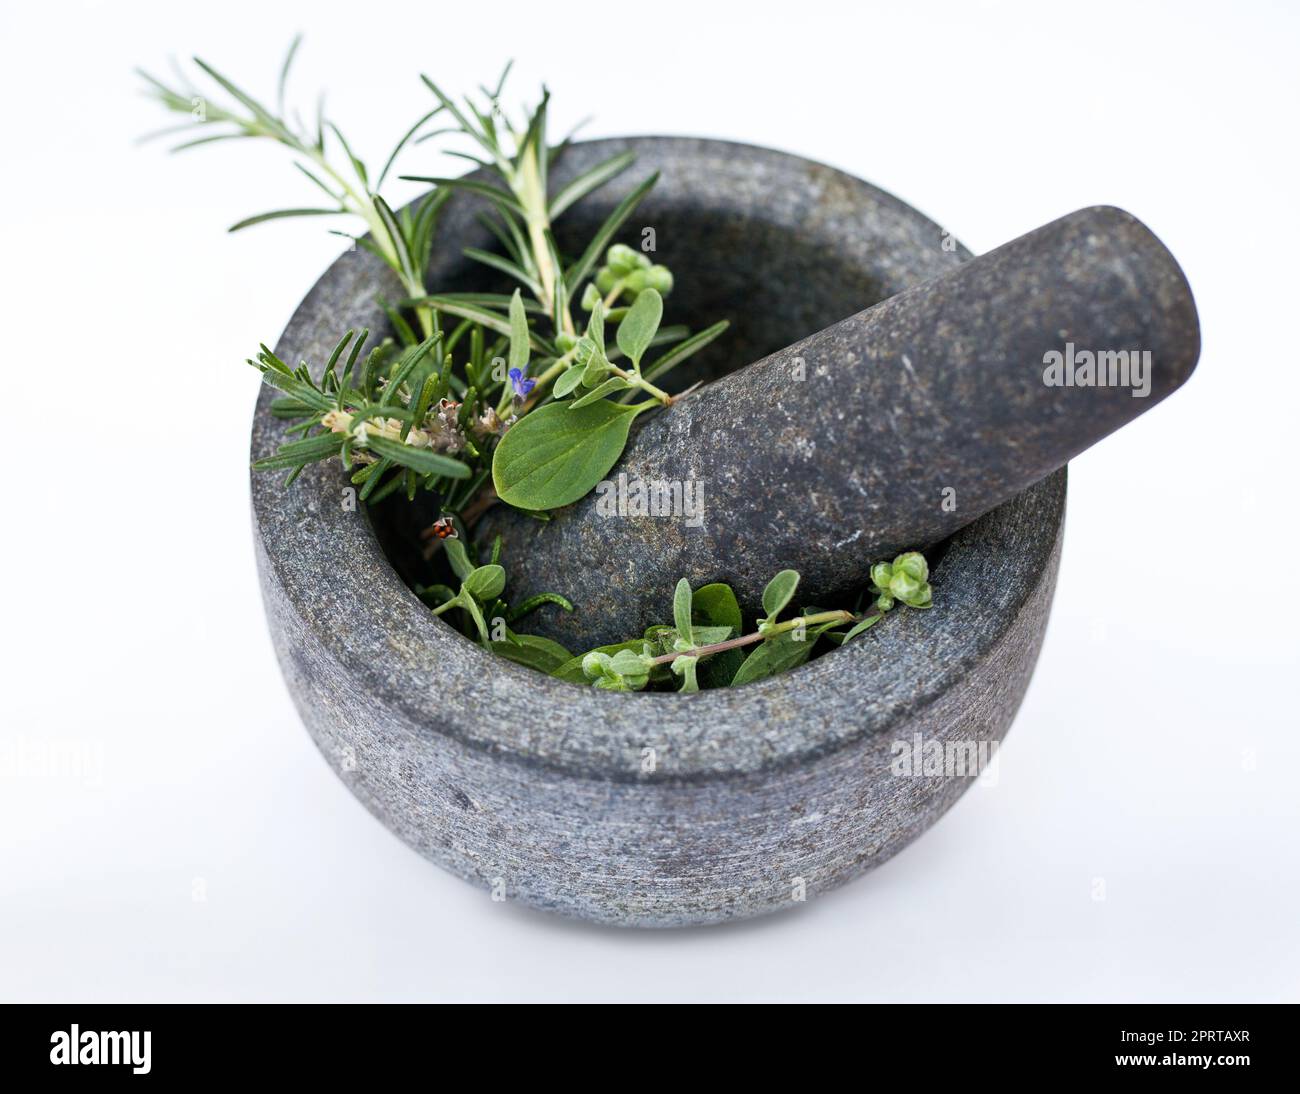 Things are going to get tasty. a mortar and pestle with herbs. Stock Photo